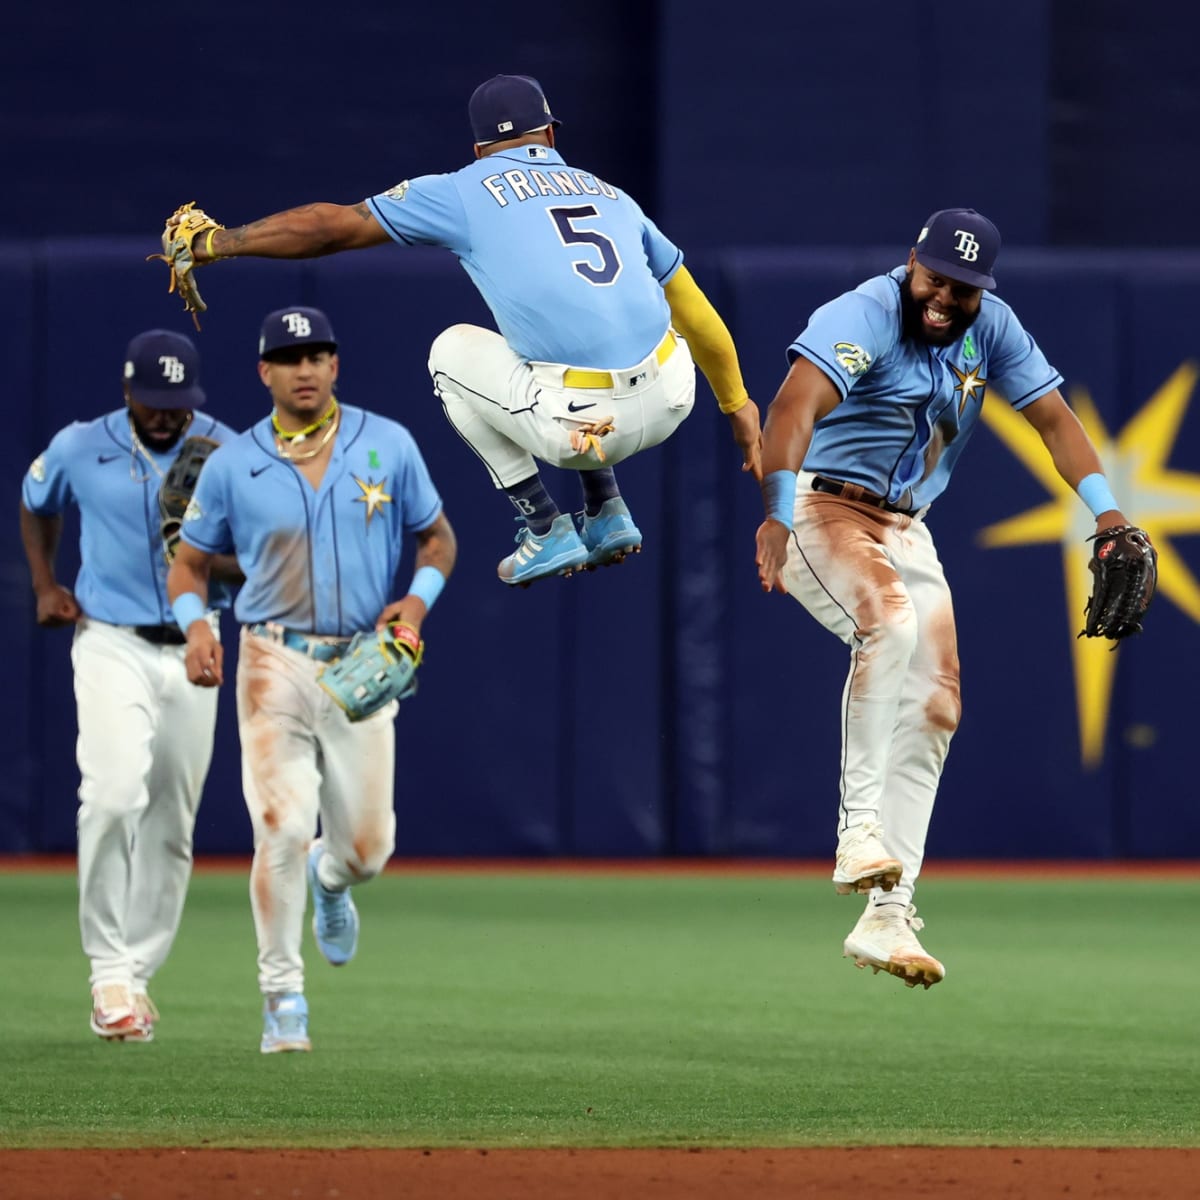 Tampa Bay Rays Win Again, Make History in Process - Fastball